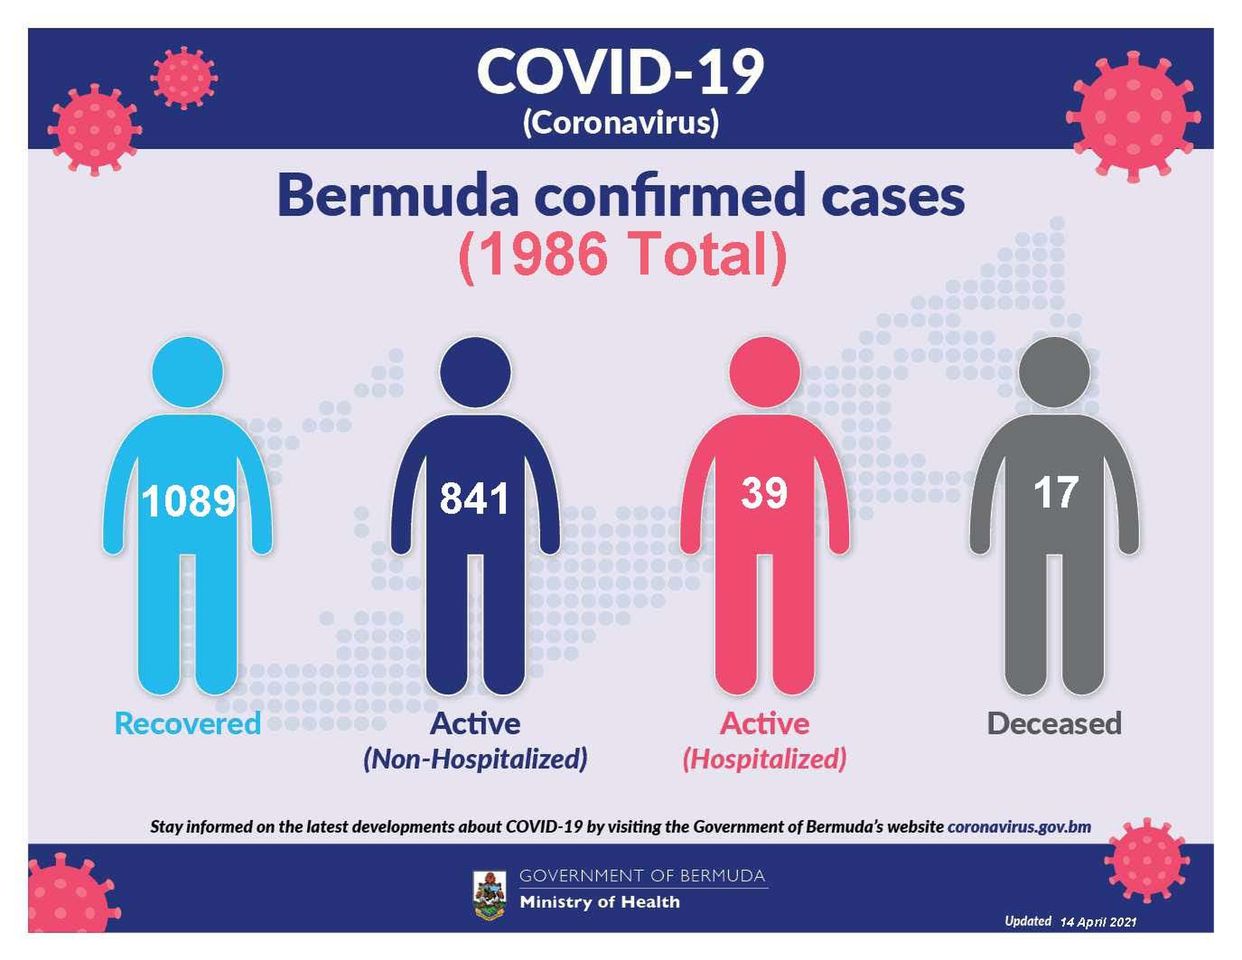 1 new COVID-19 death and 51 new cases reported in Bermuda